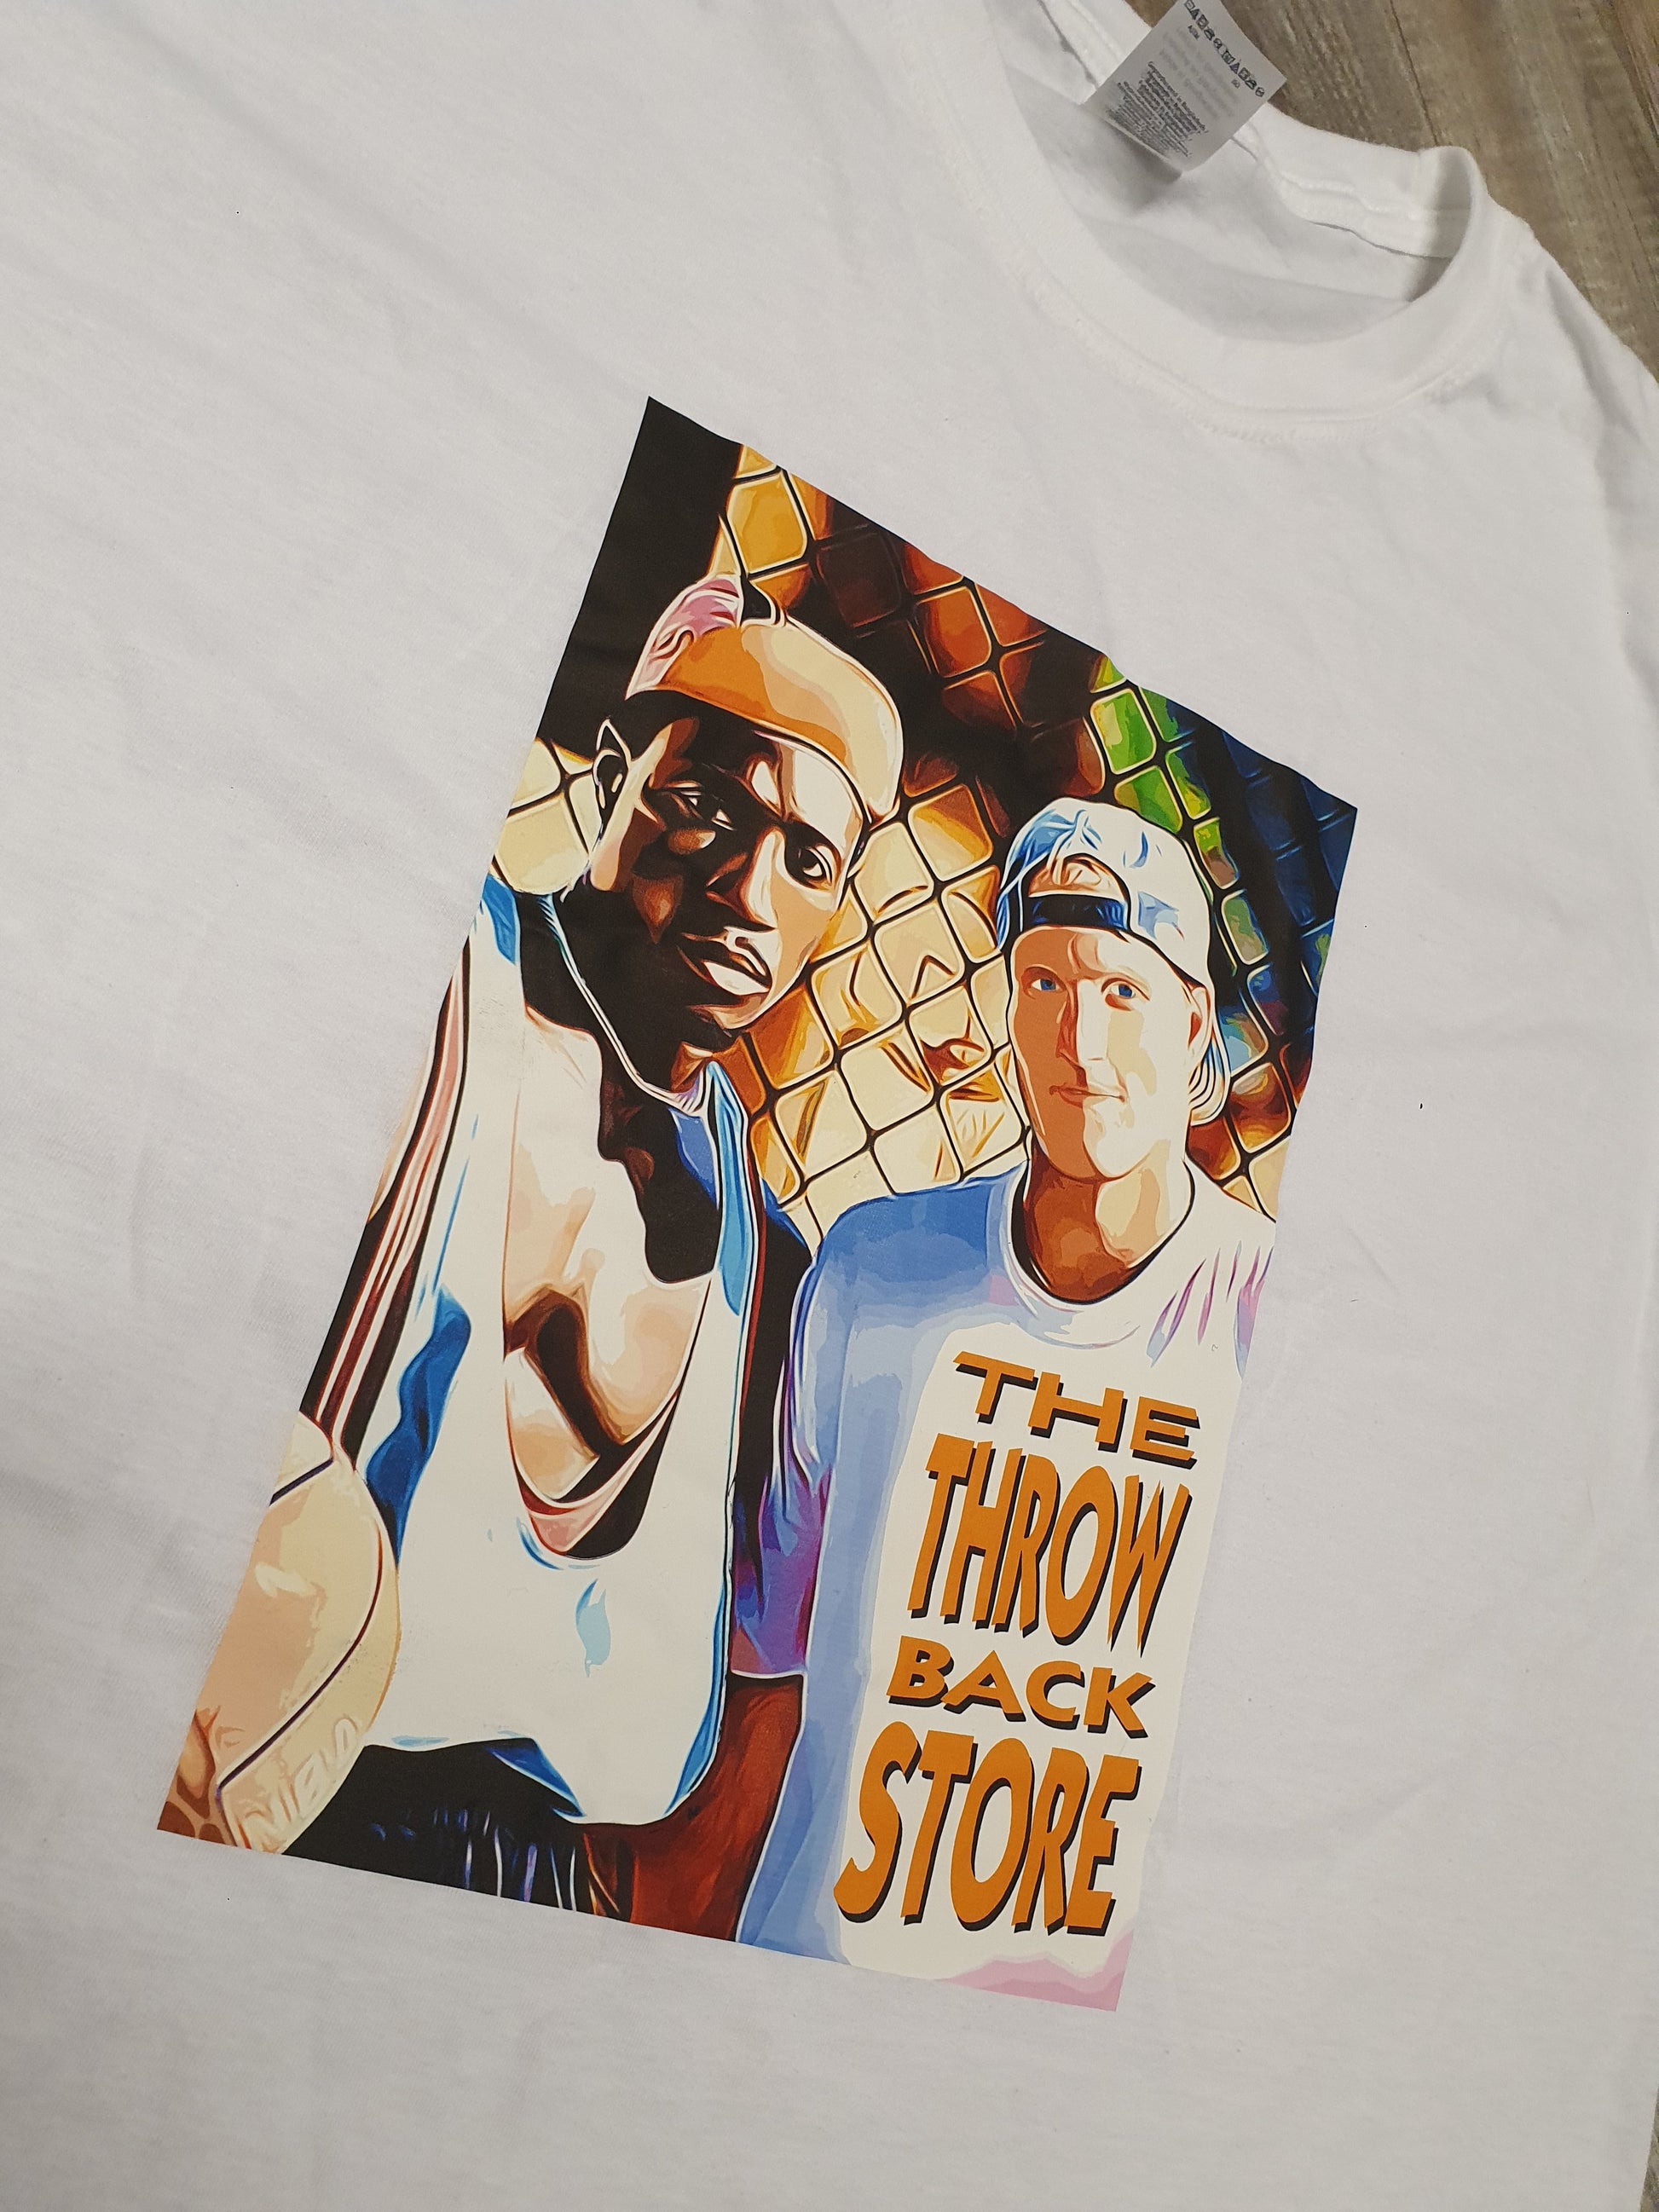 White Men Cant Jump White T-Shirt Size S M L and XL